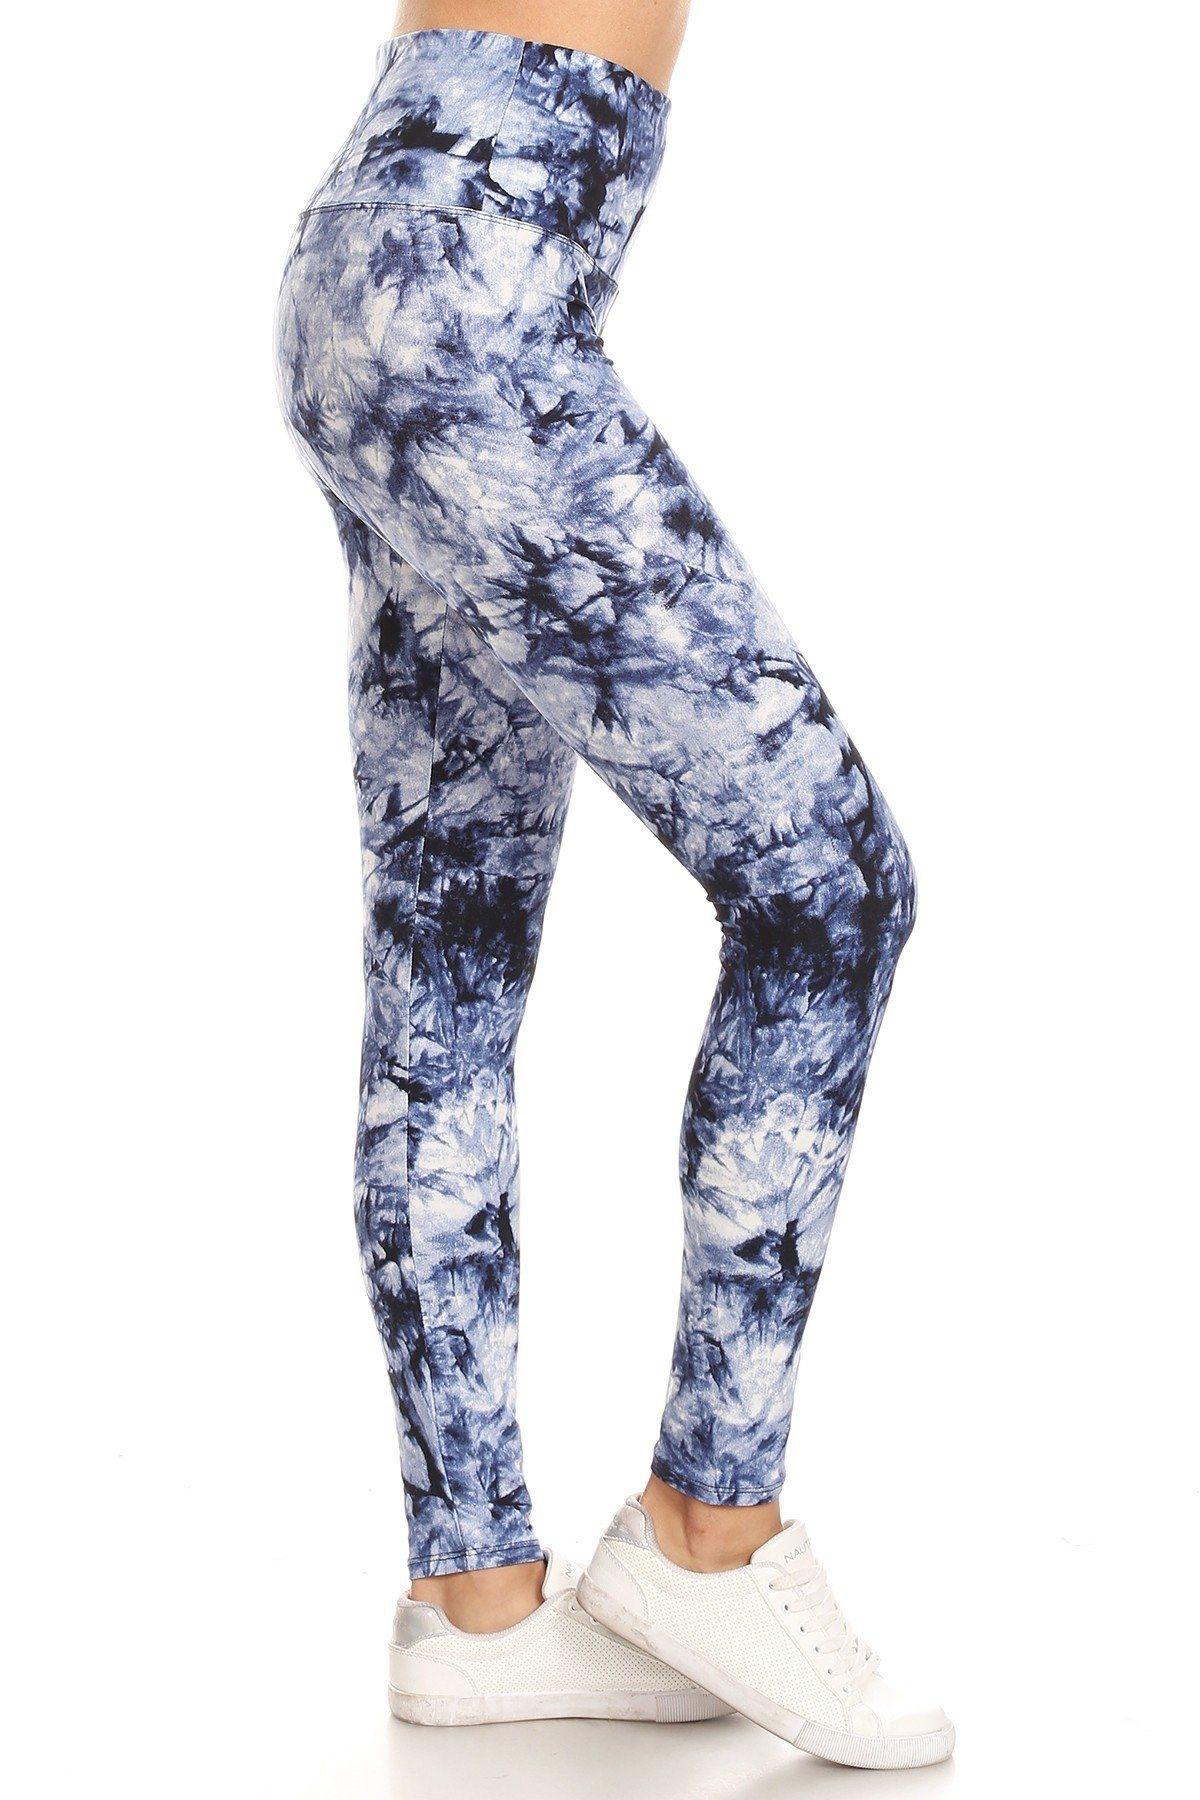 5-inch Long Yoga Style Banded Lined Tie Dye Printed Knit Legging With High Waist - Pearlara